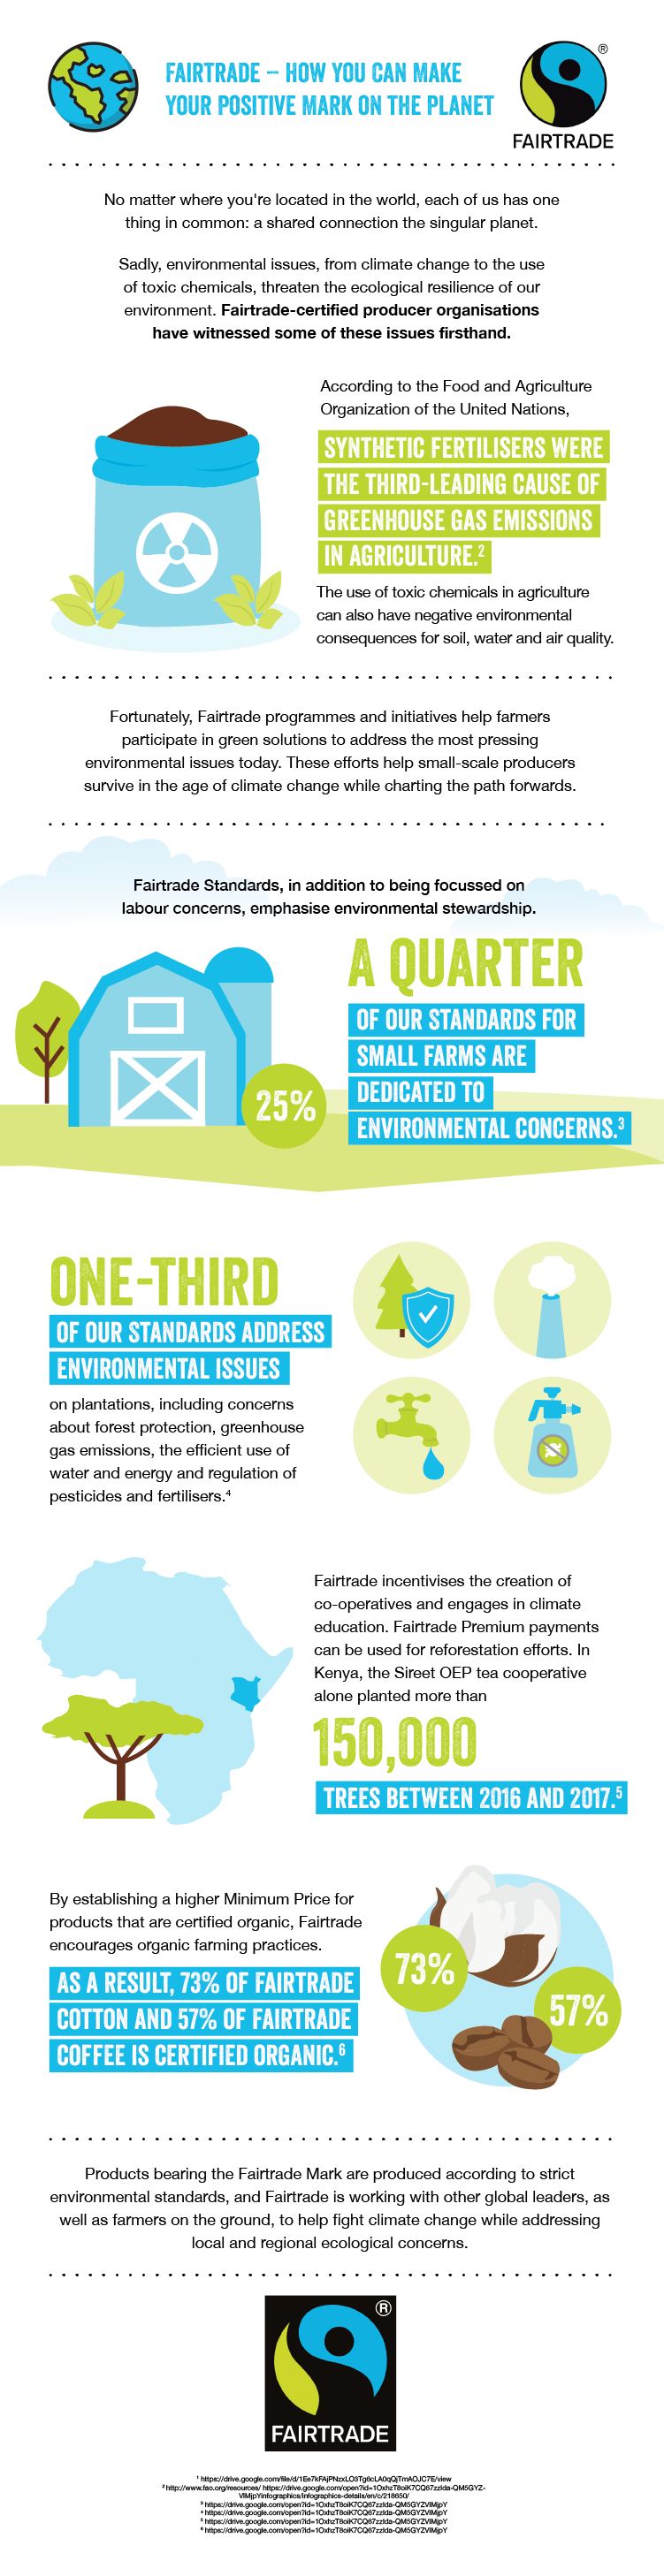 How Fairtrade helps make a positive mark on the planet infographic